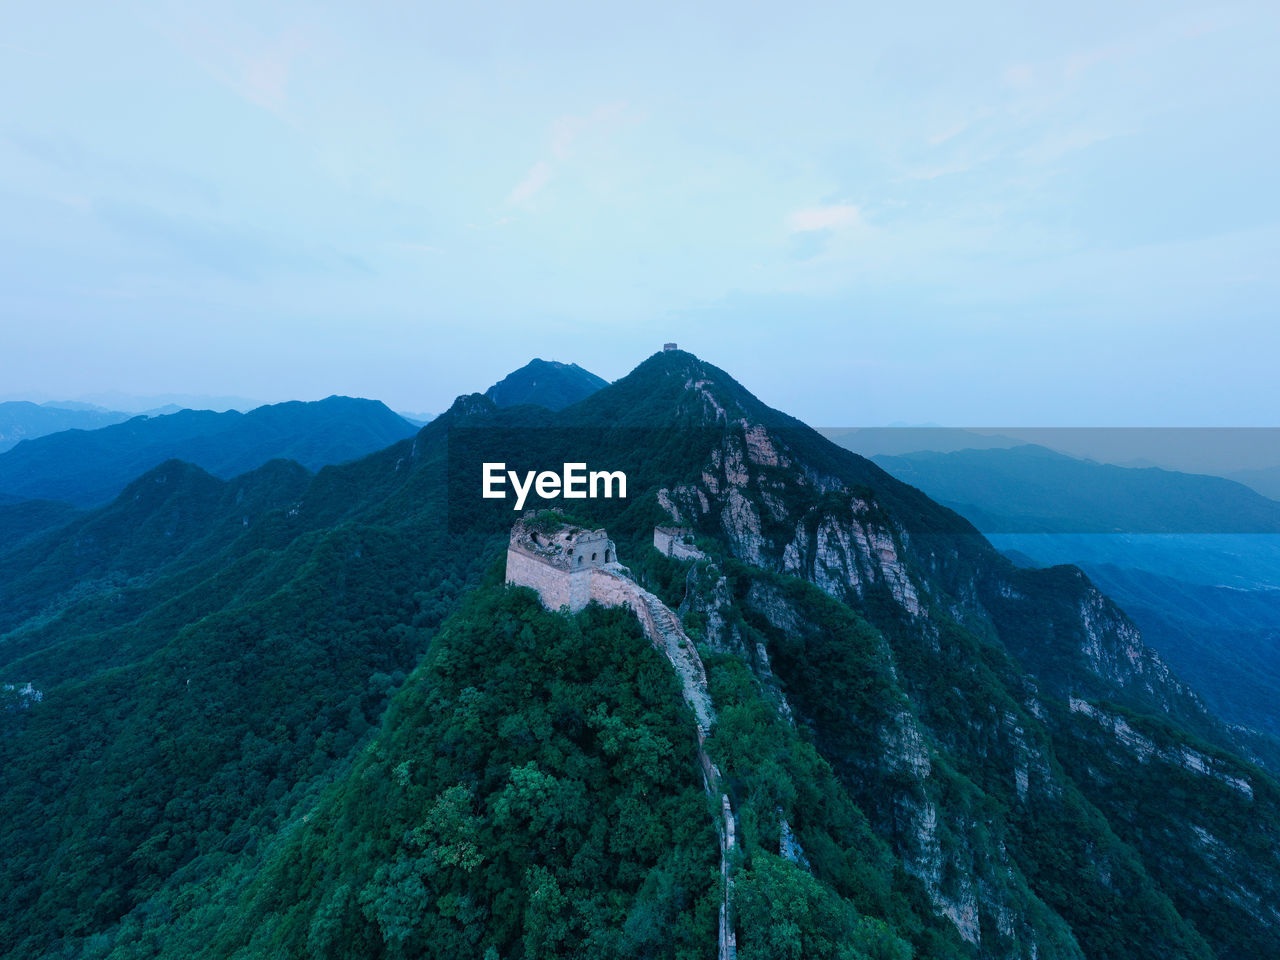 Mountains and the great wall landscape